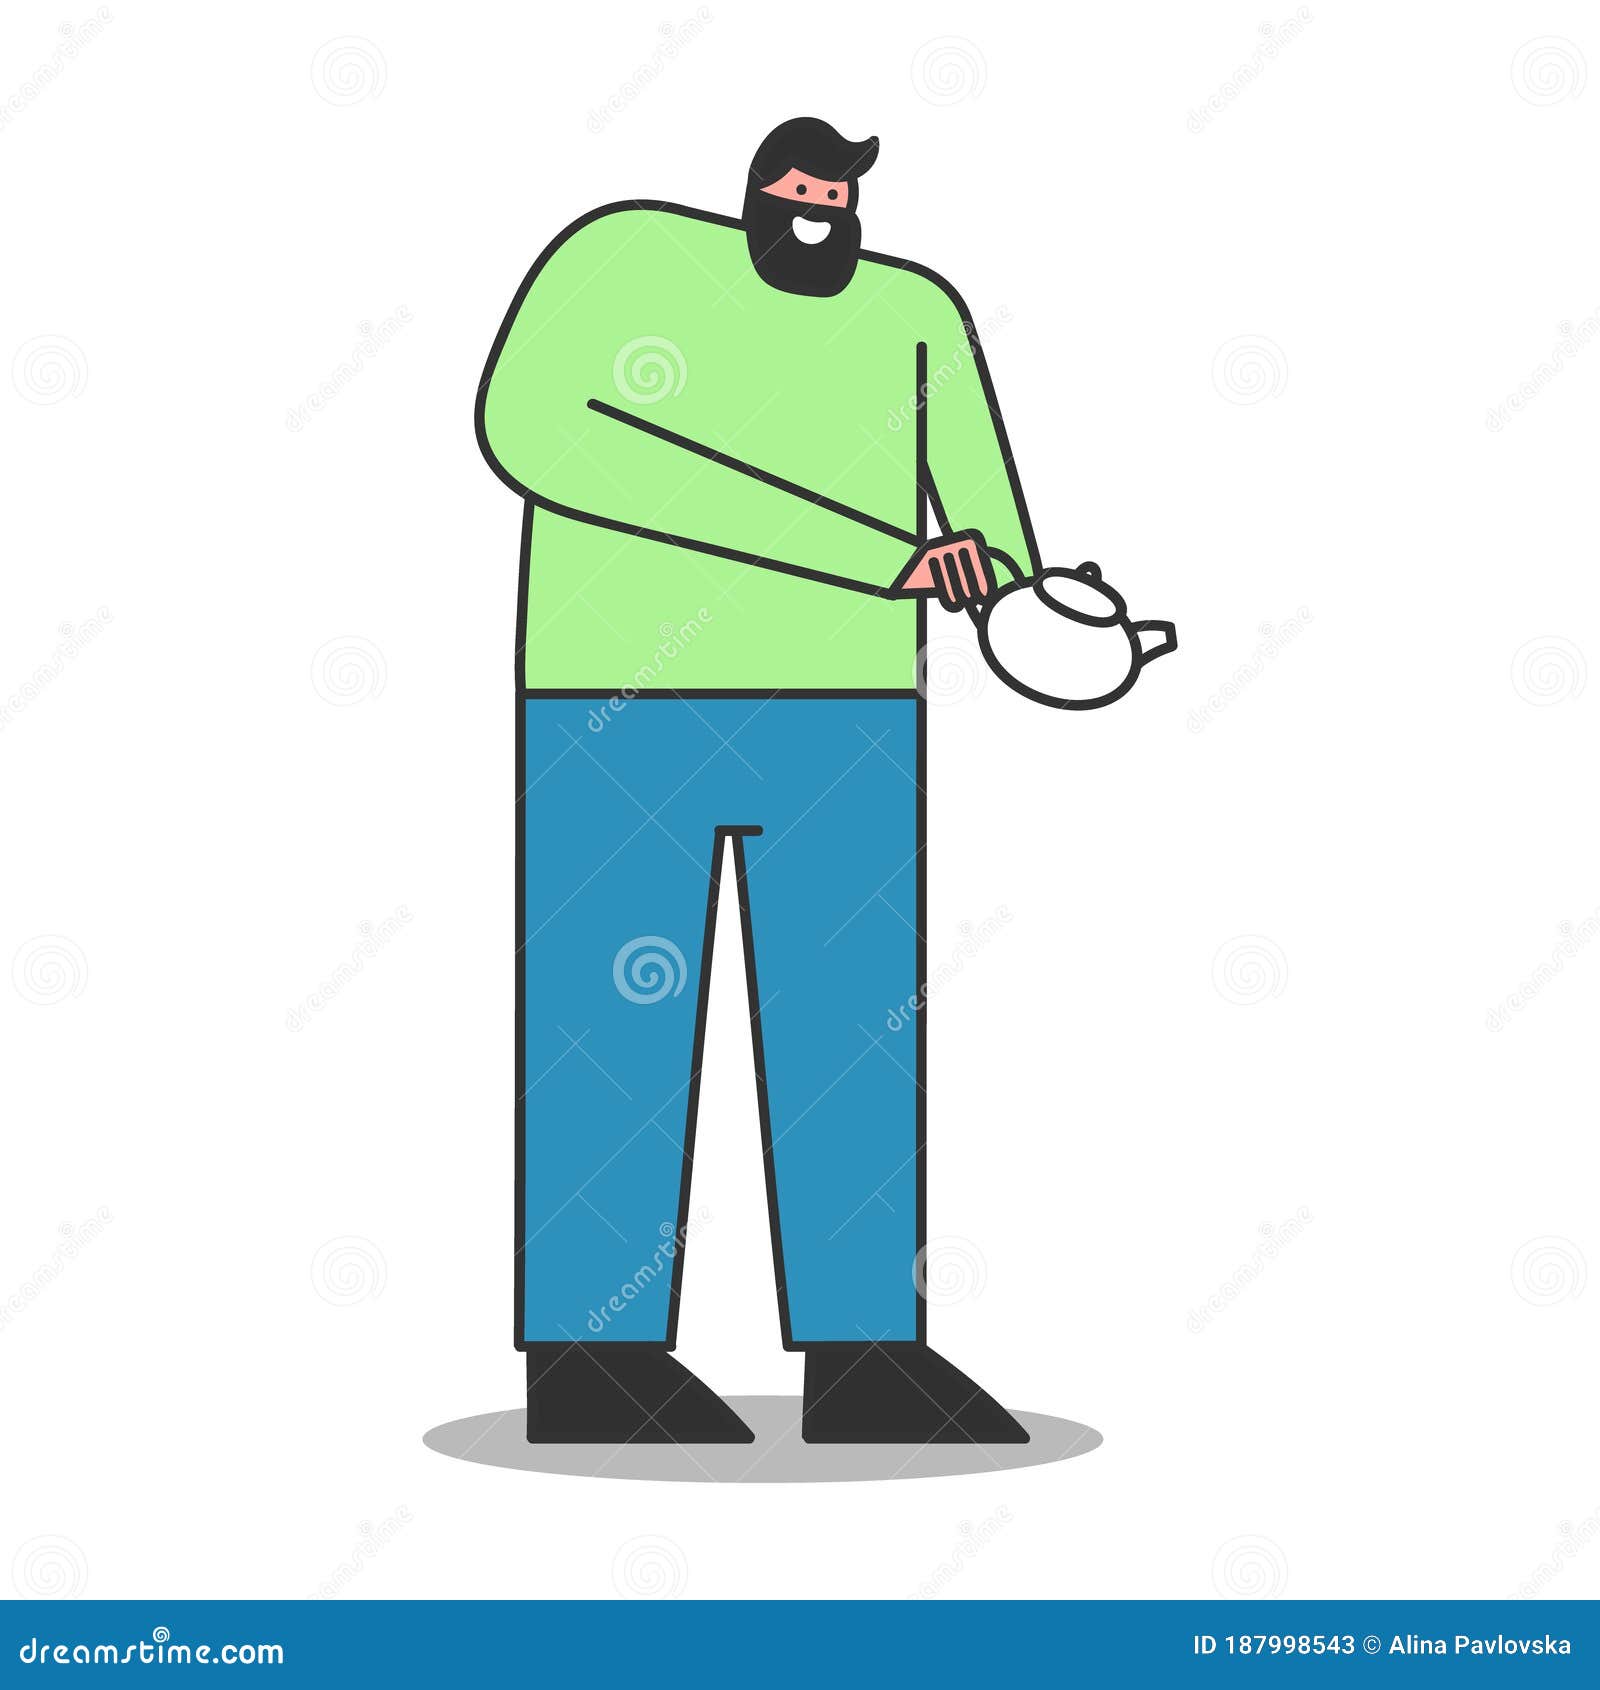 Man Holding Teapot and Pouring Tea Isolated on White Background. Waiter  Cartoon Character Stock Vector - Illustration of person, background:  187998543